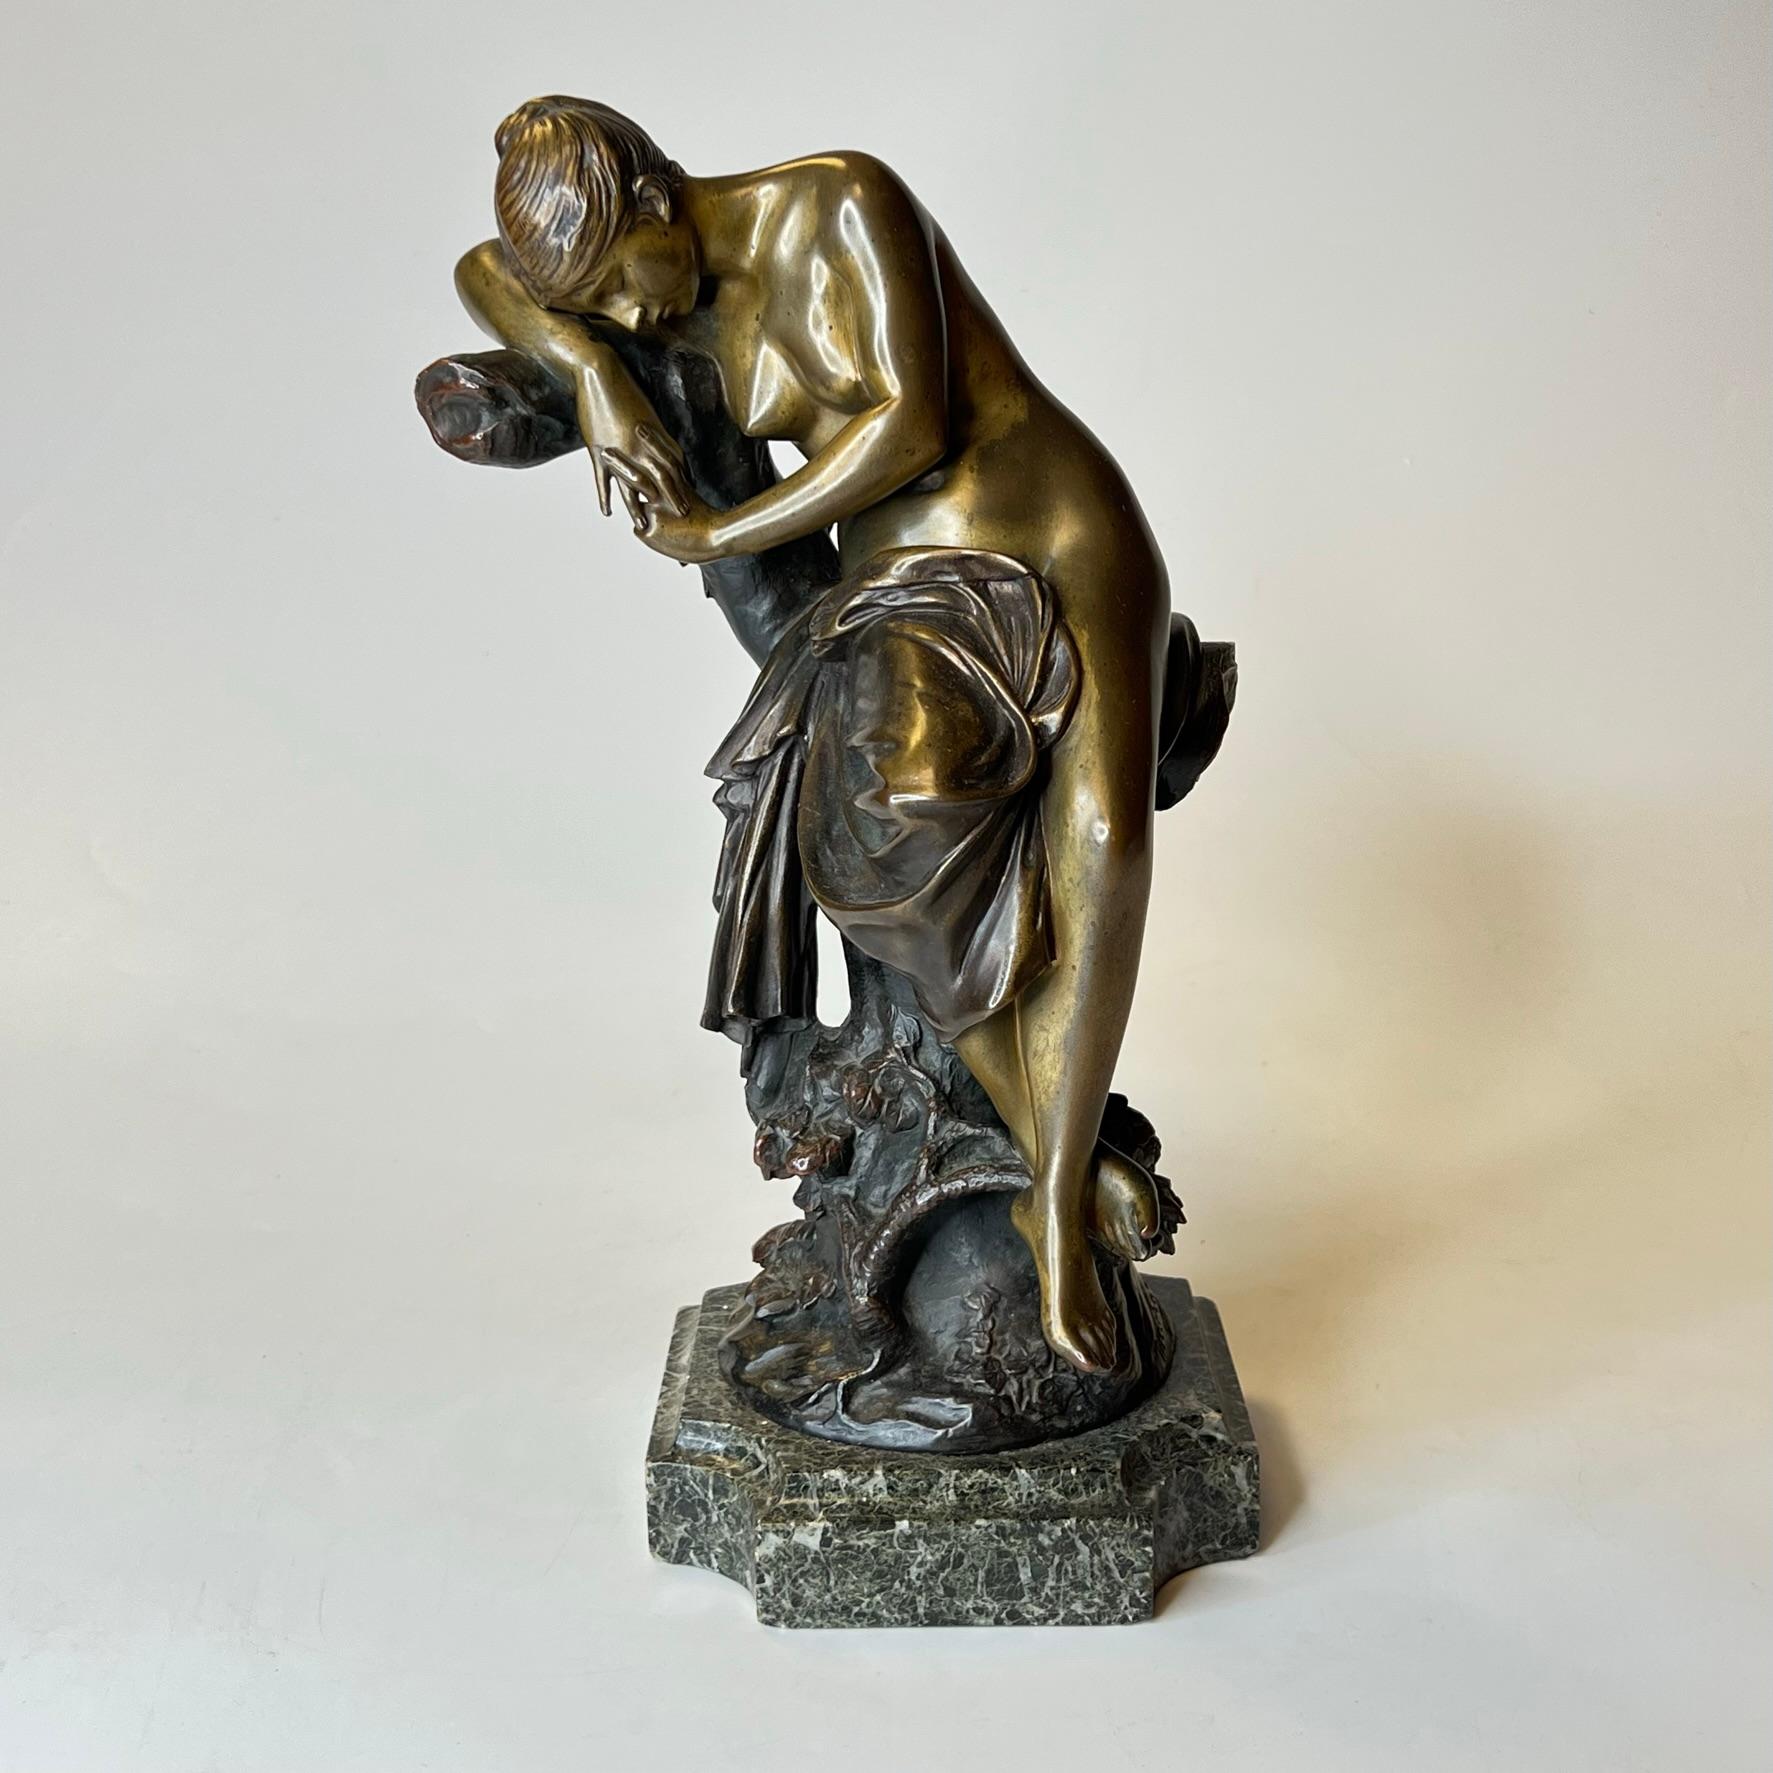 French Bronze Sculpture of Sleeping Maiden by Luca Madrassi (1848-1918) For Sale